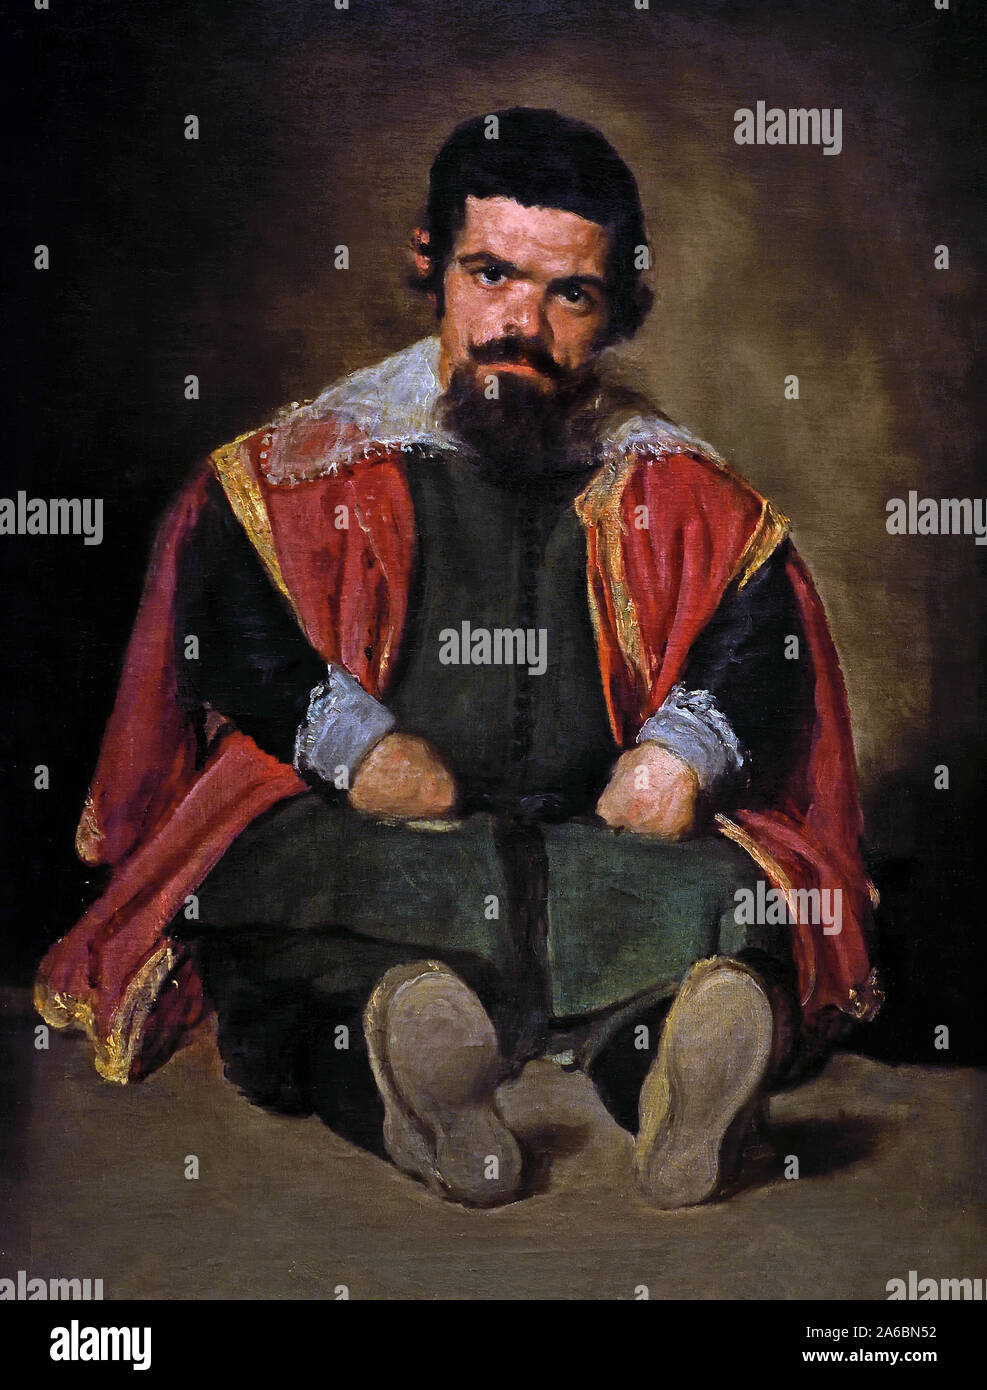 The Buffoon El Primo 1644 by Diego Velázquez (1599–1660) 17th century Spain Spanish. (Sebastián de Morra, the subject has recently been identified as the court buffoon El Primo who accompanied Philip IV to Aragon in 1644 where Velázquez painted him) Stock Photo